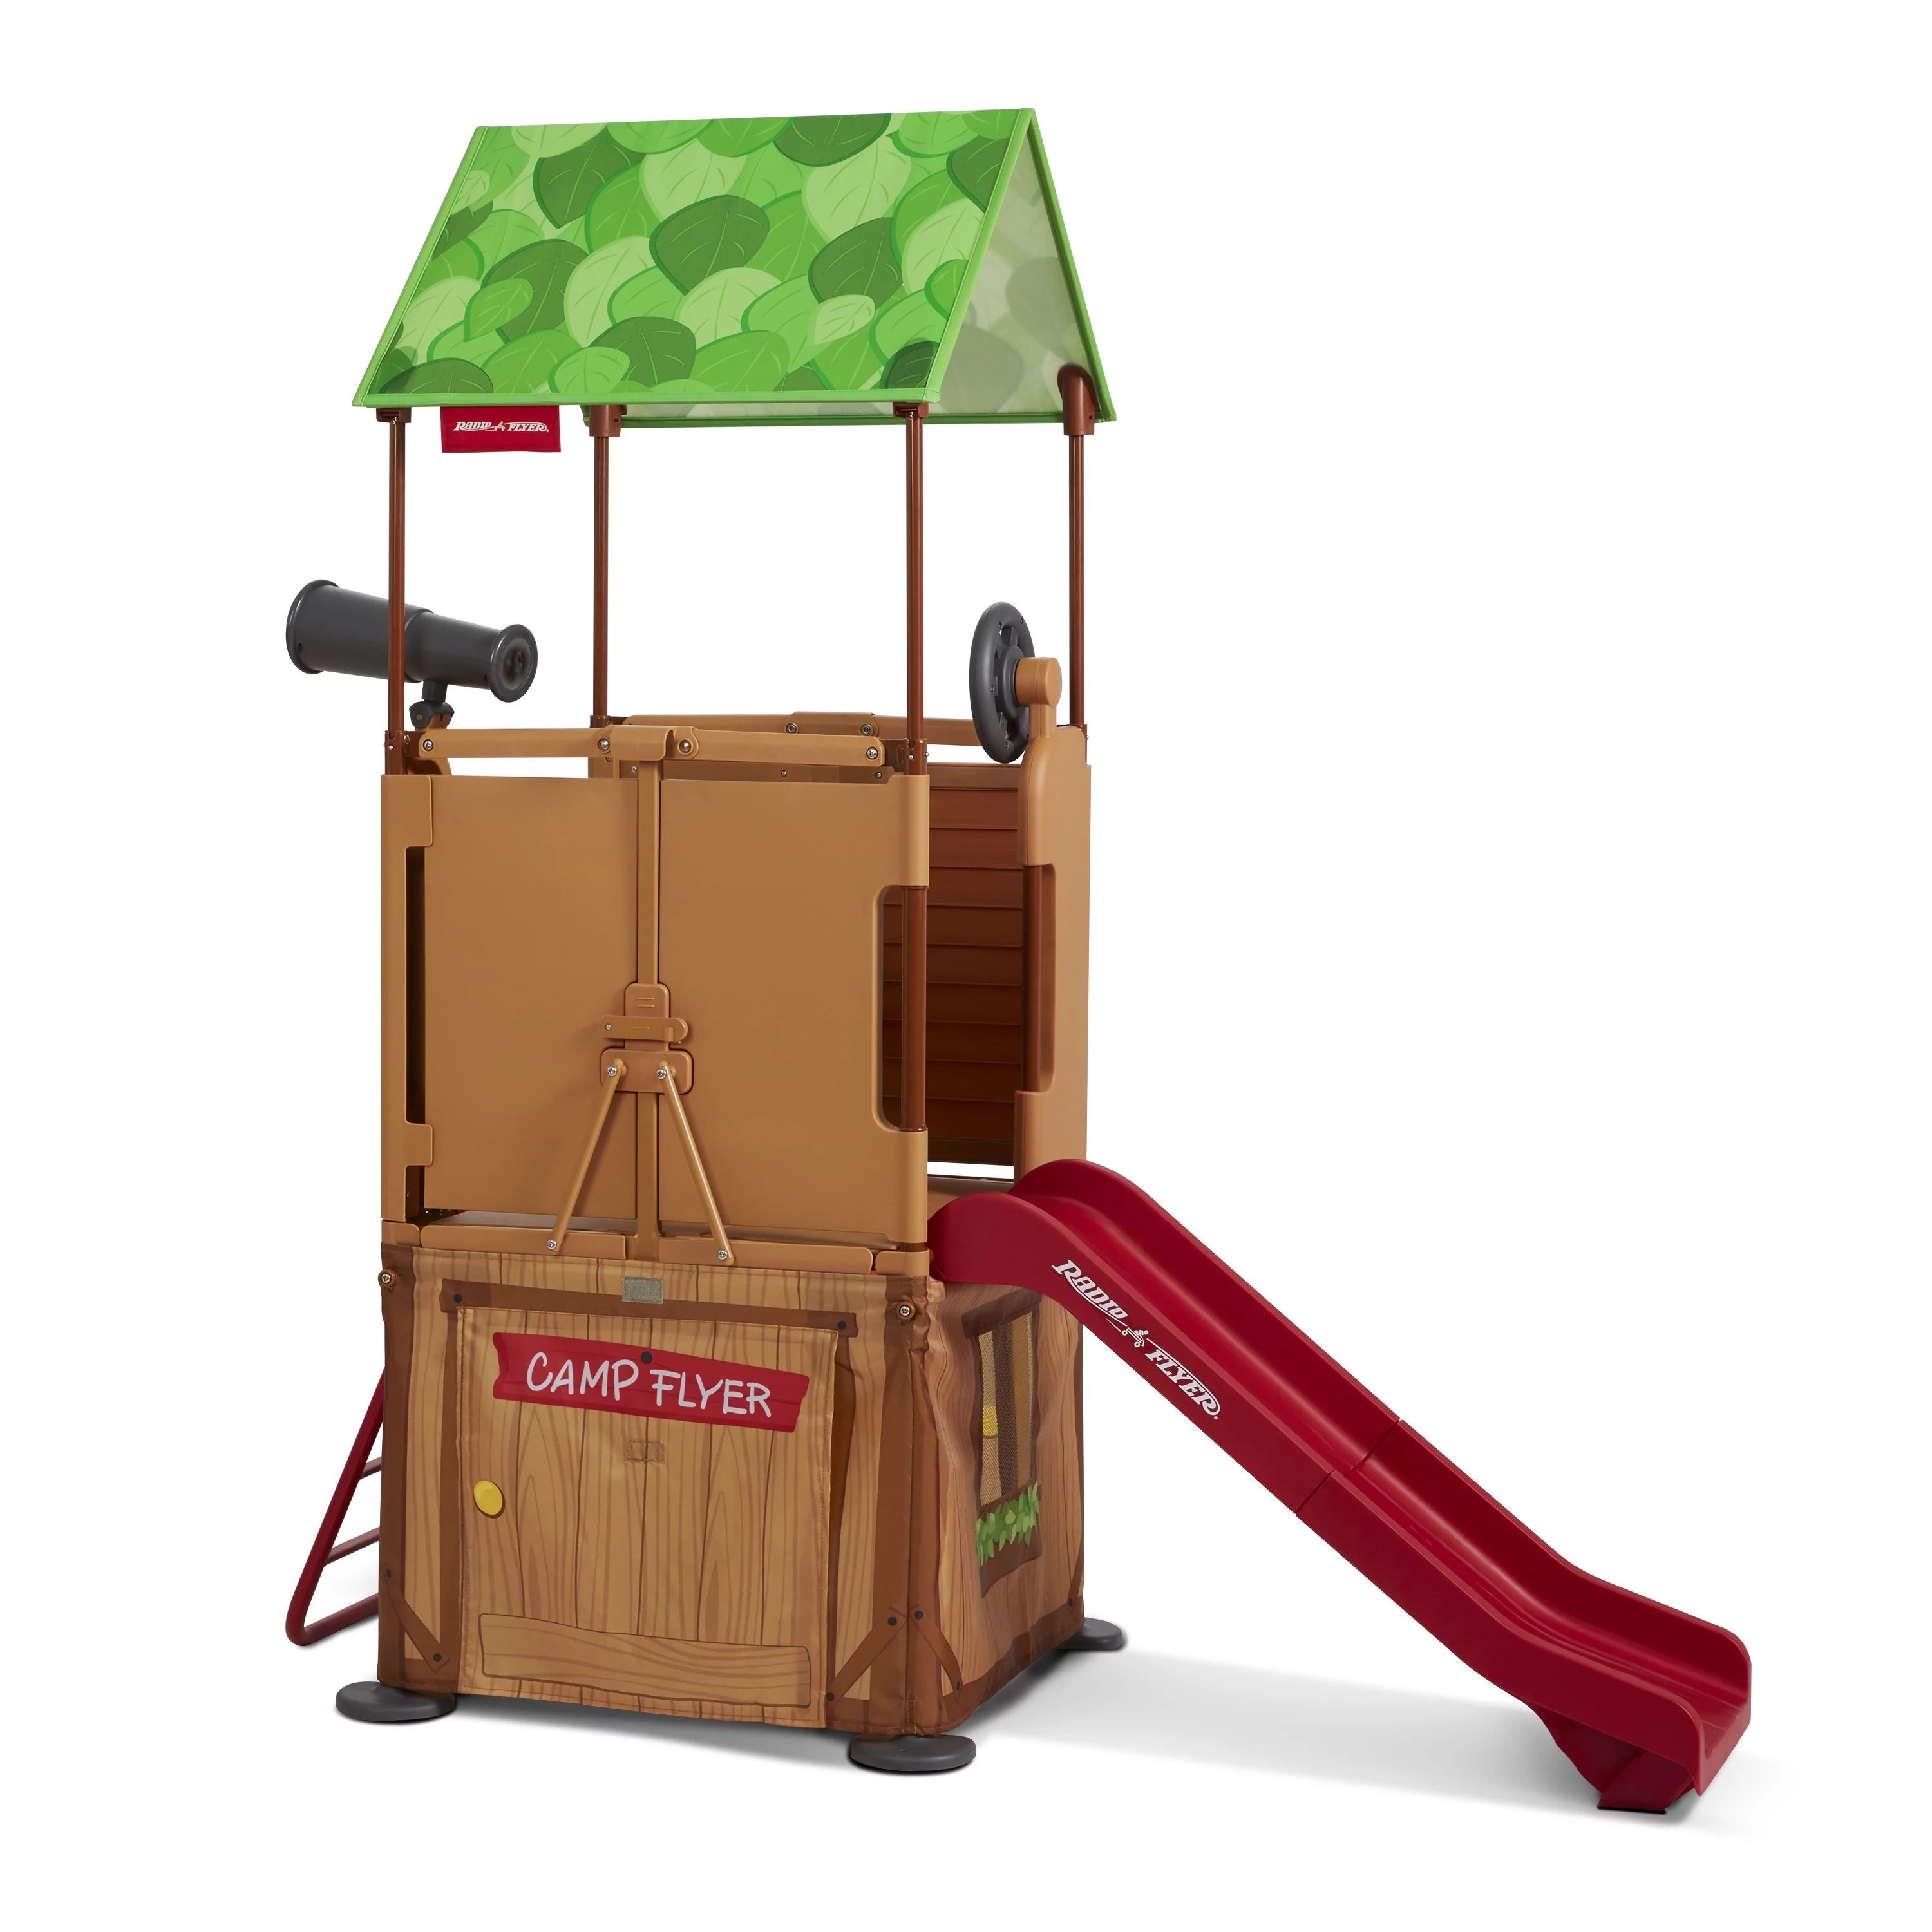 Radio Flyer, Folding Treetop Climber Playset with Slide, for Kids and Toddlers, Ages 2-5 years, I... | Walmart (US)